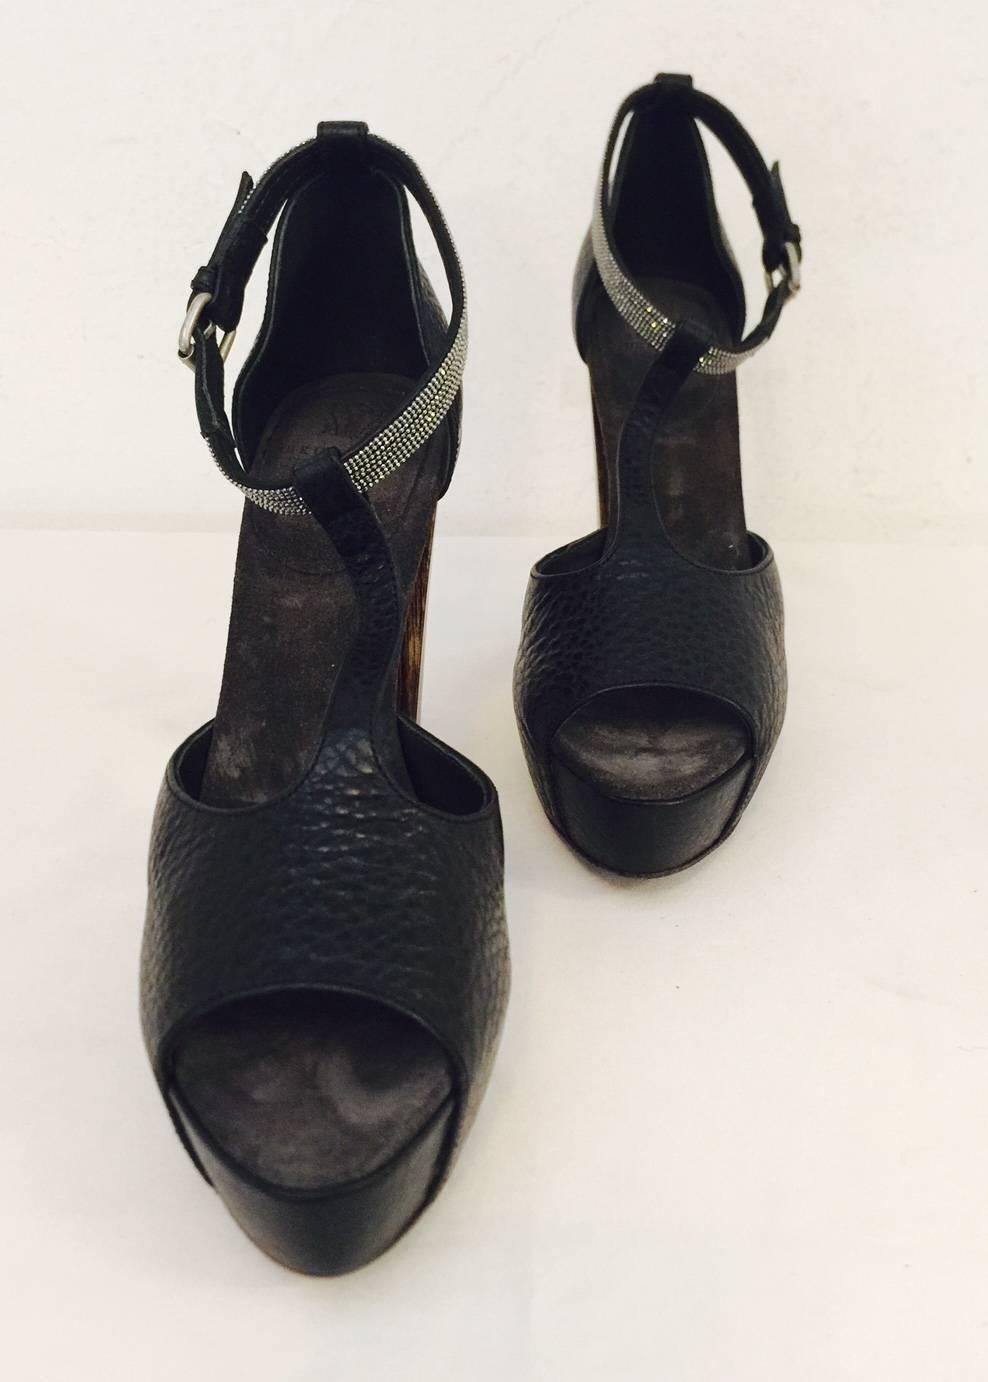 Bellisima Brunello Cucinelli Black Leather High Heel Sandals with Ankle Strap In Excellent Condition For Sale In Palm Beach, FL